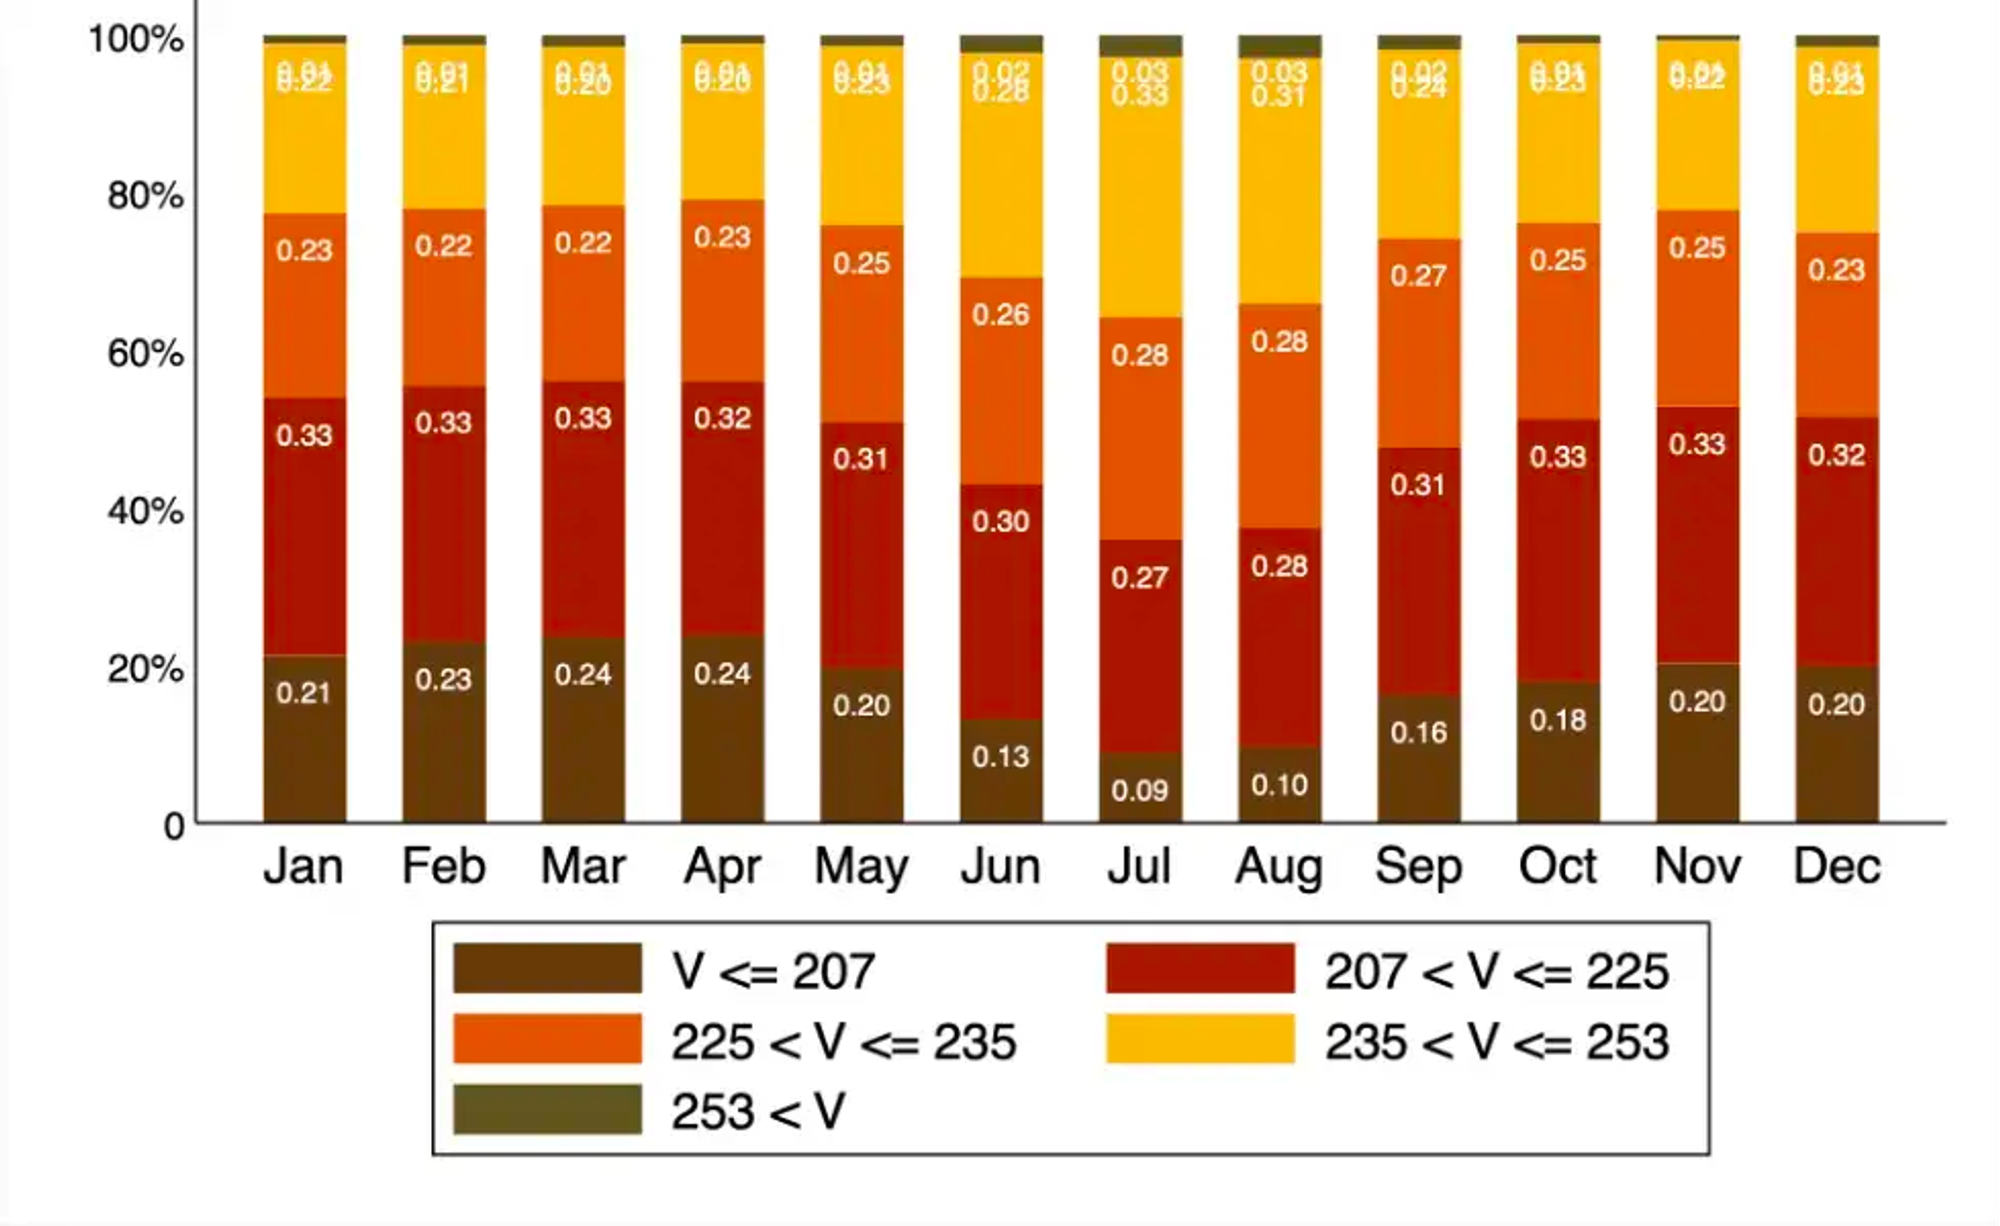 Figure 4: Voltage quality by month.